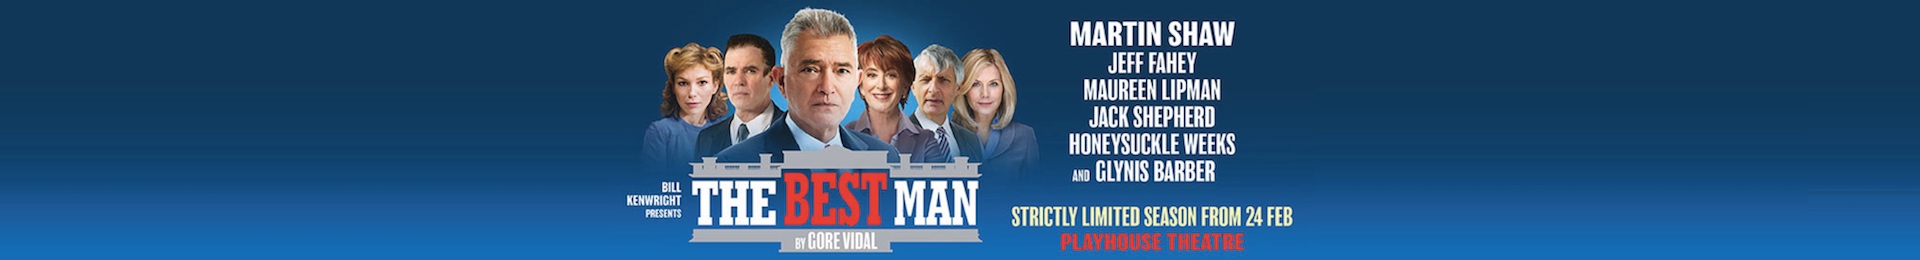 The Best Man banner image